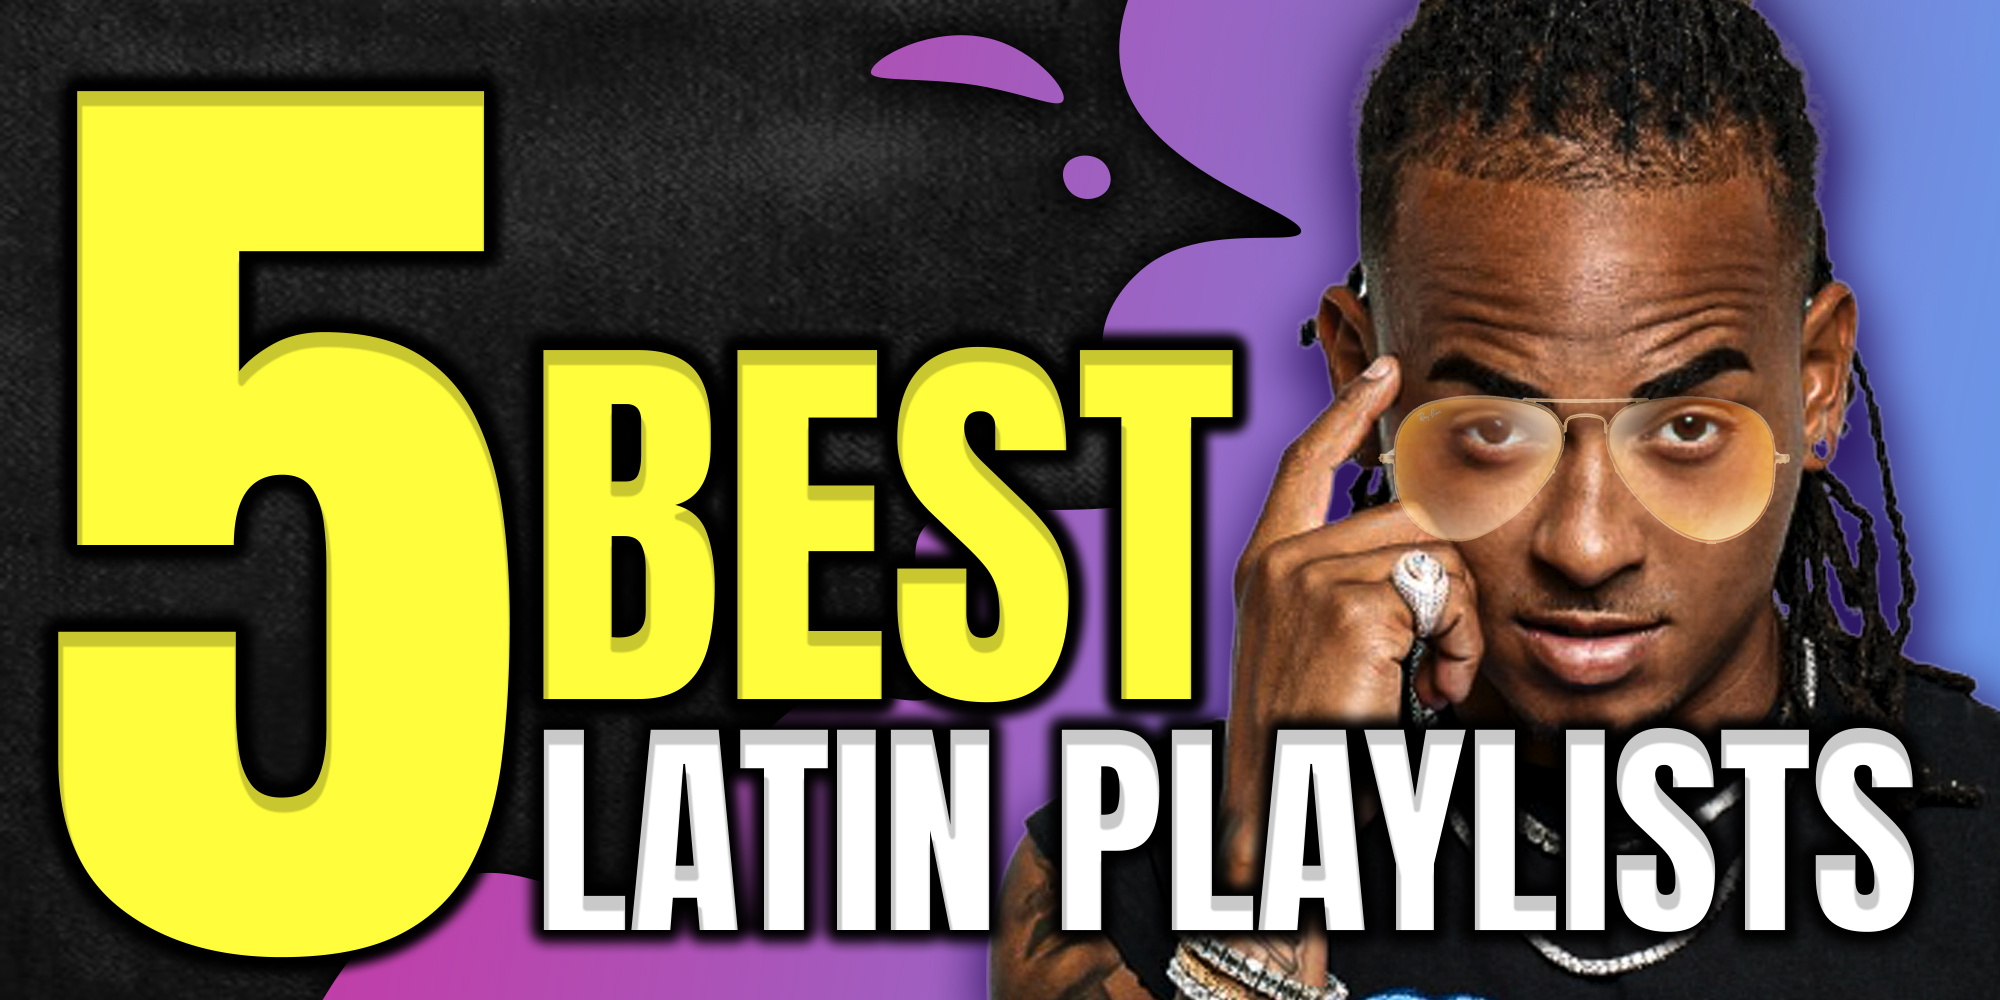 Top 5 Latin Spotify Playlists to Submit to in 2022